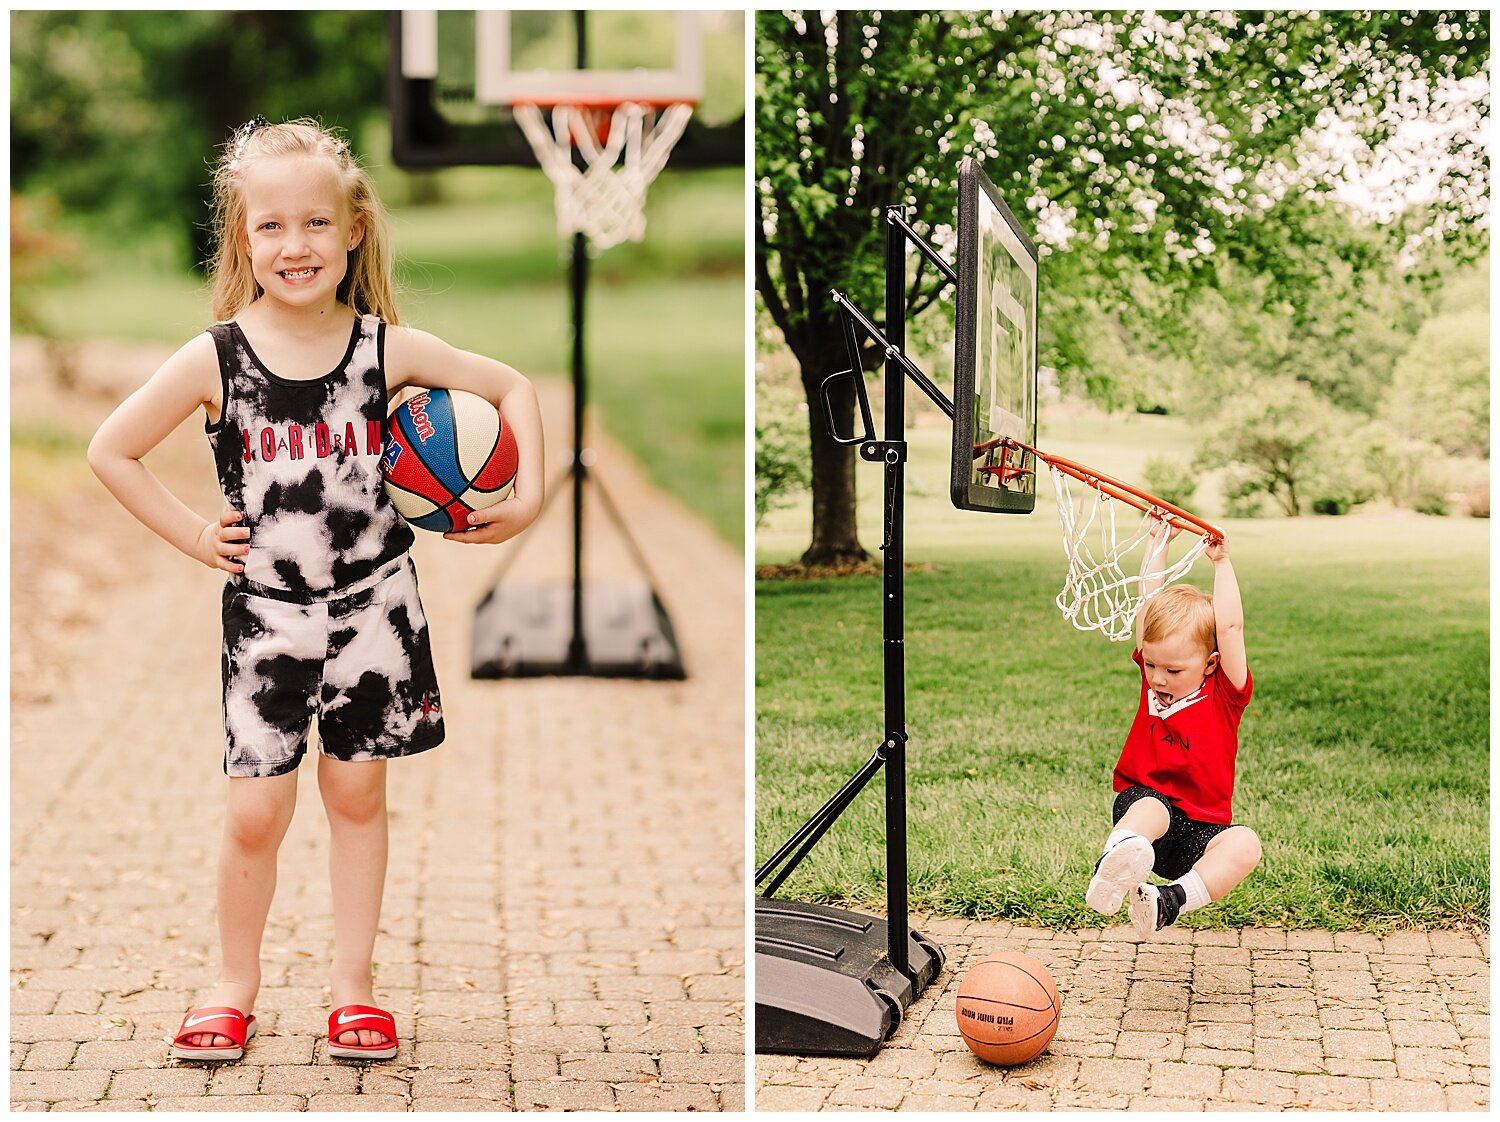  Note to families planning a session… pick an activity your kids love and incorporate it into your shoot. They have a blast and you get adorable action shots of your kids living their best lives! Win win!  